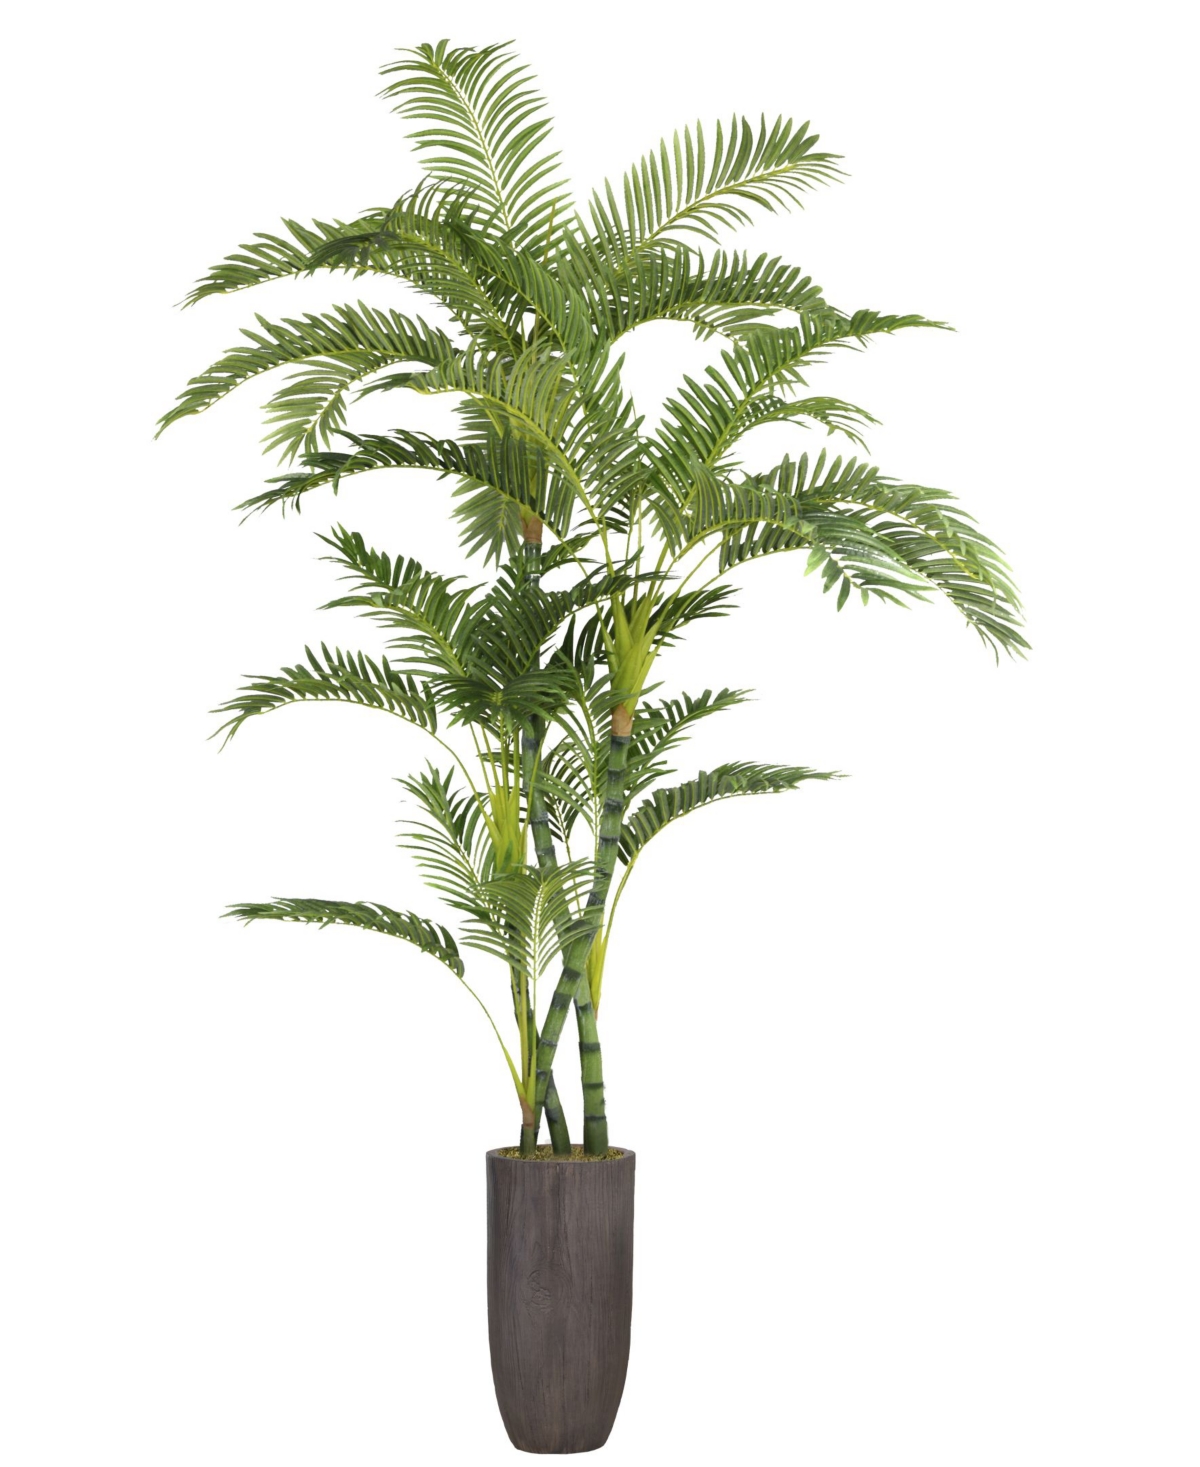 86.25" Tall Bamboo Tree Faux Decorative in Natural Poles with Resin Planter - Brown